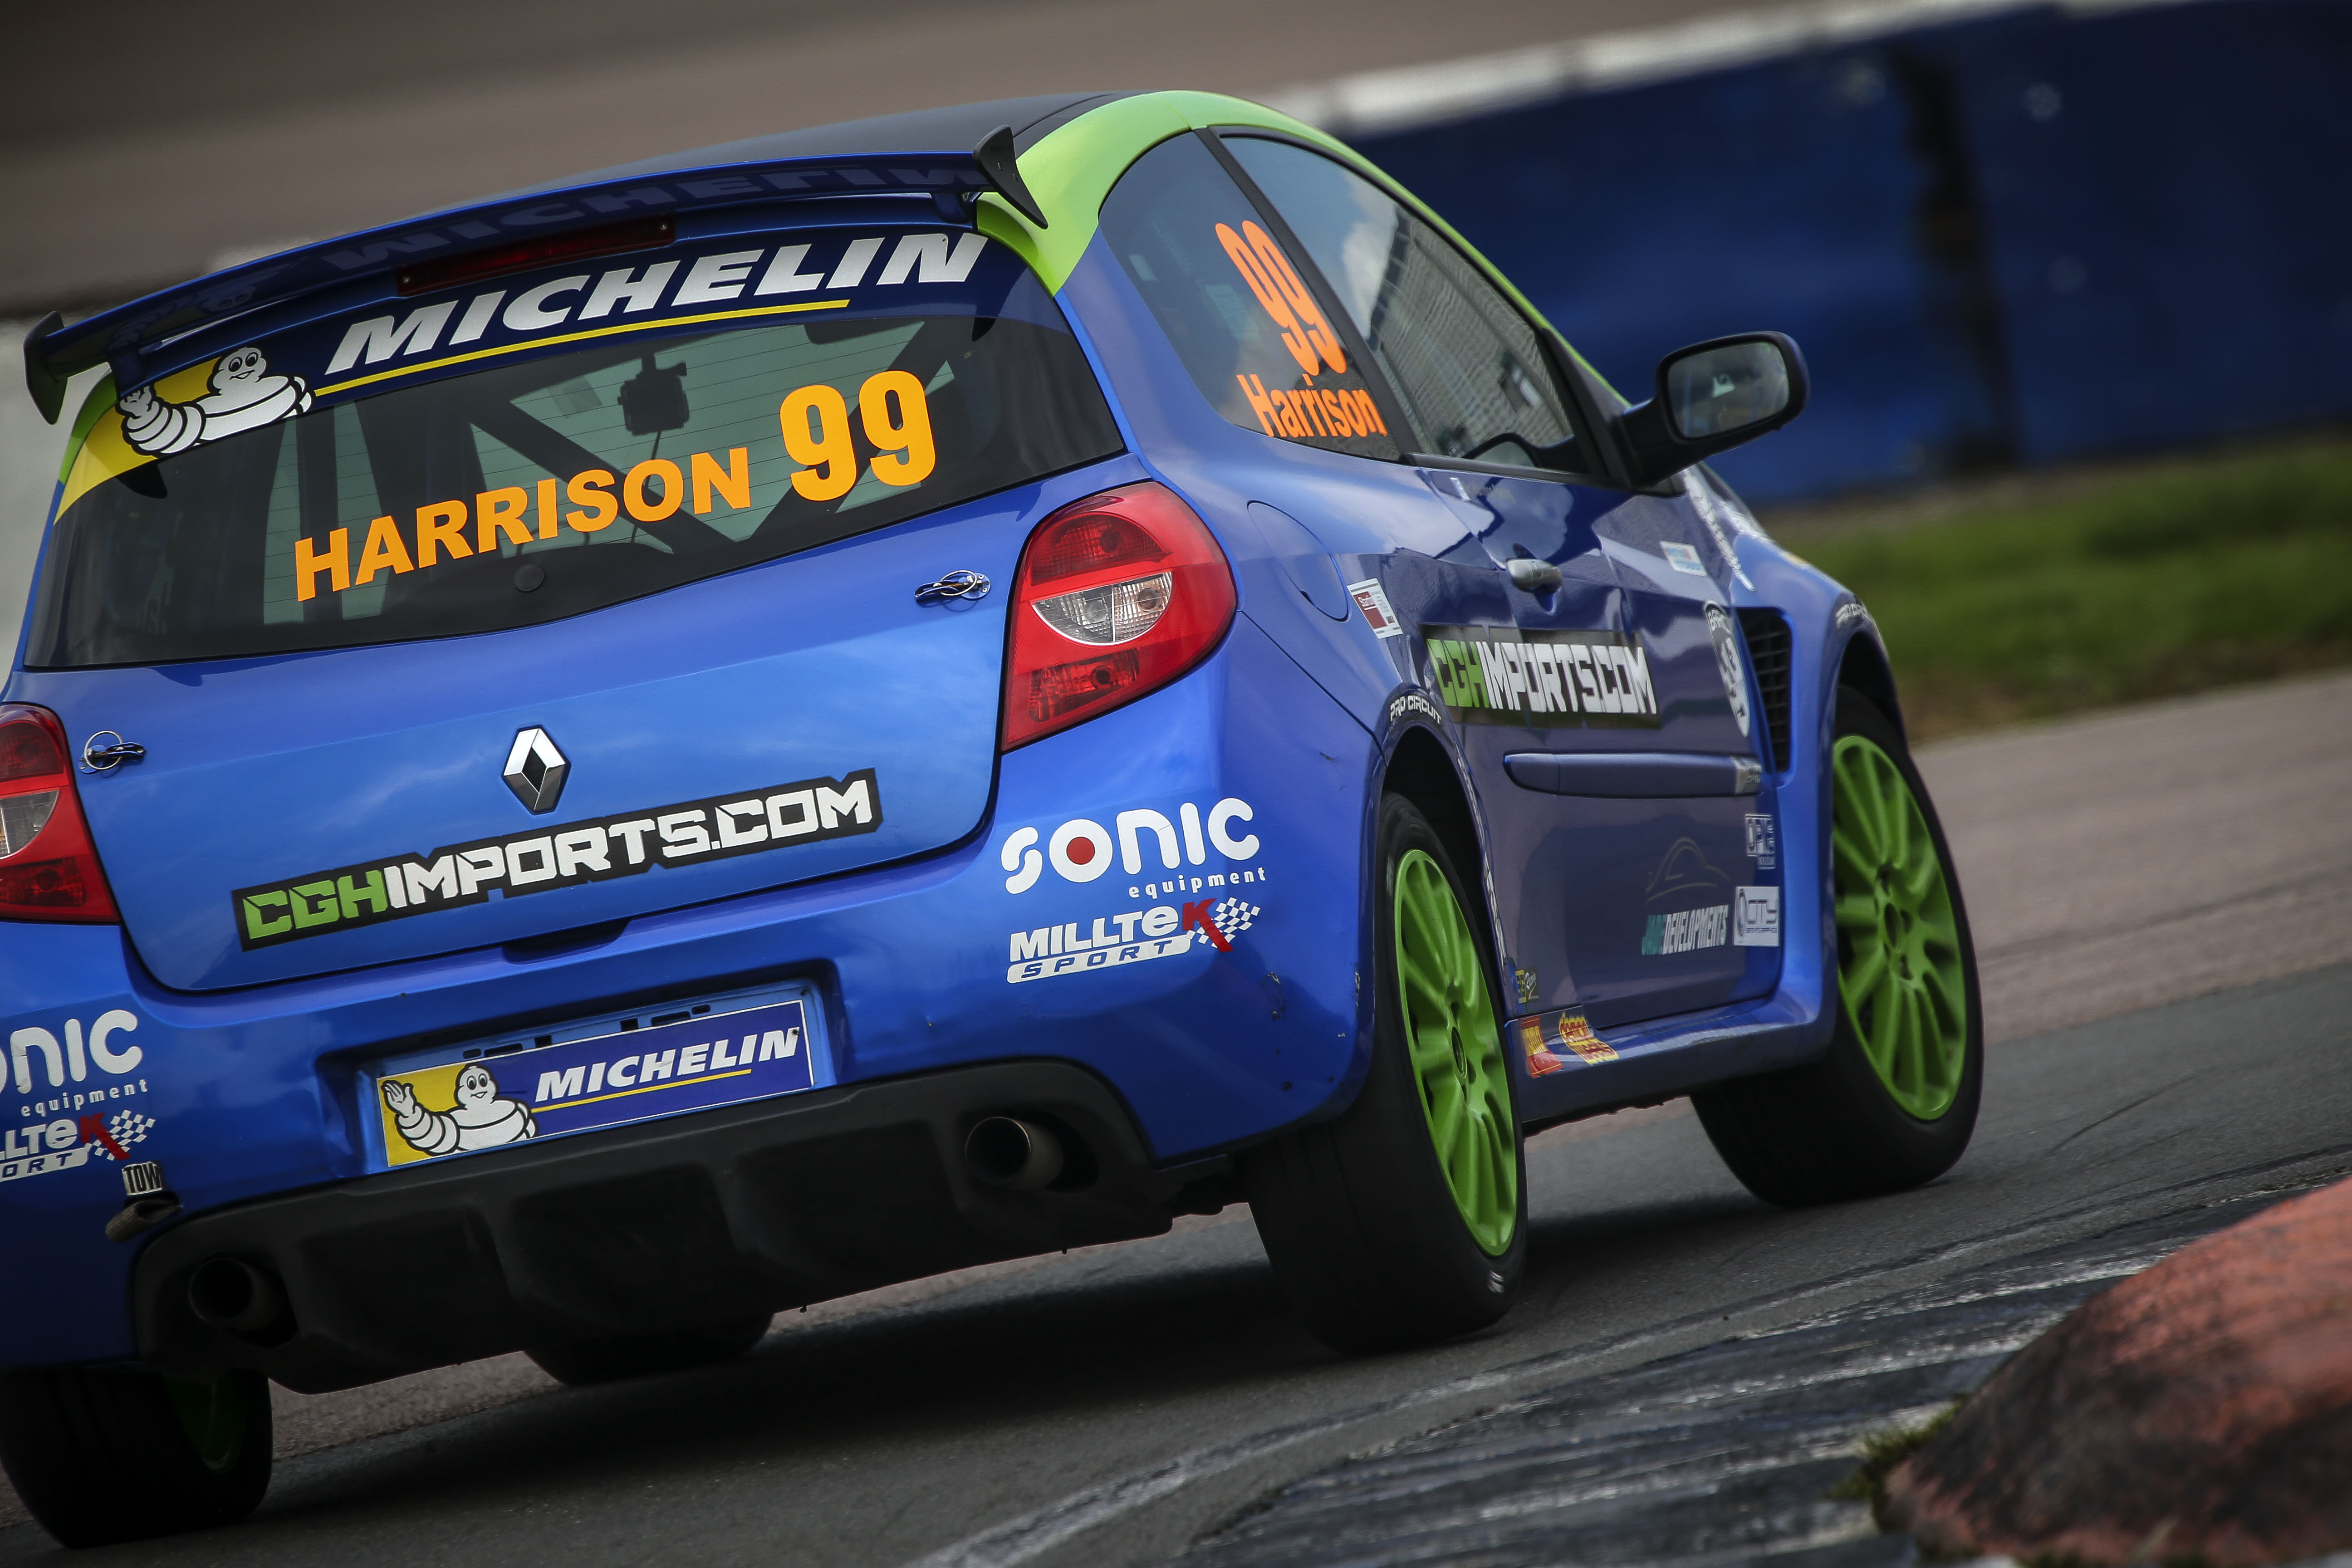 BEN PALMER CEMENTS PERFECT START TO MICHELIN CLIO CUP SERIES CHAMPIONSHIP AT ROCKINGHAM